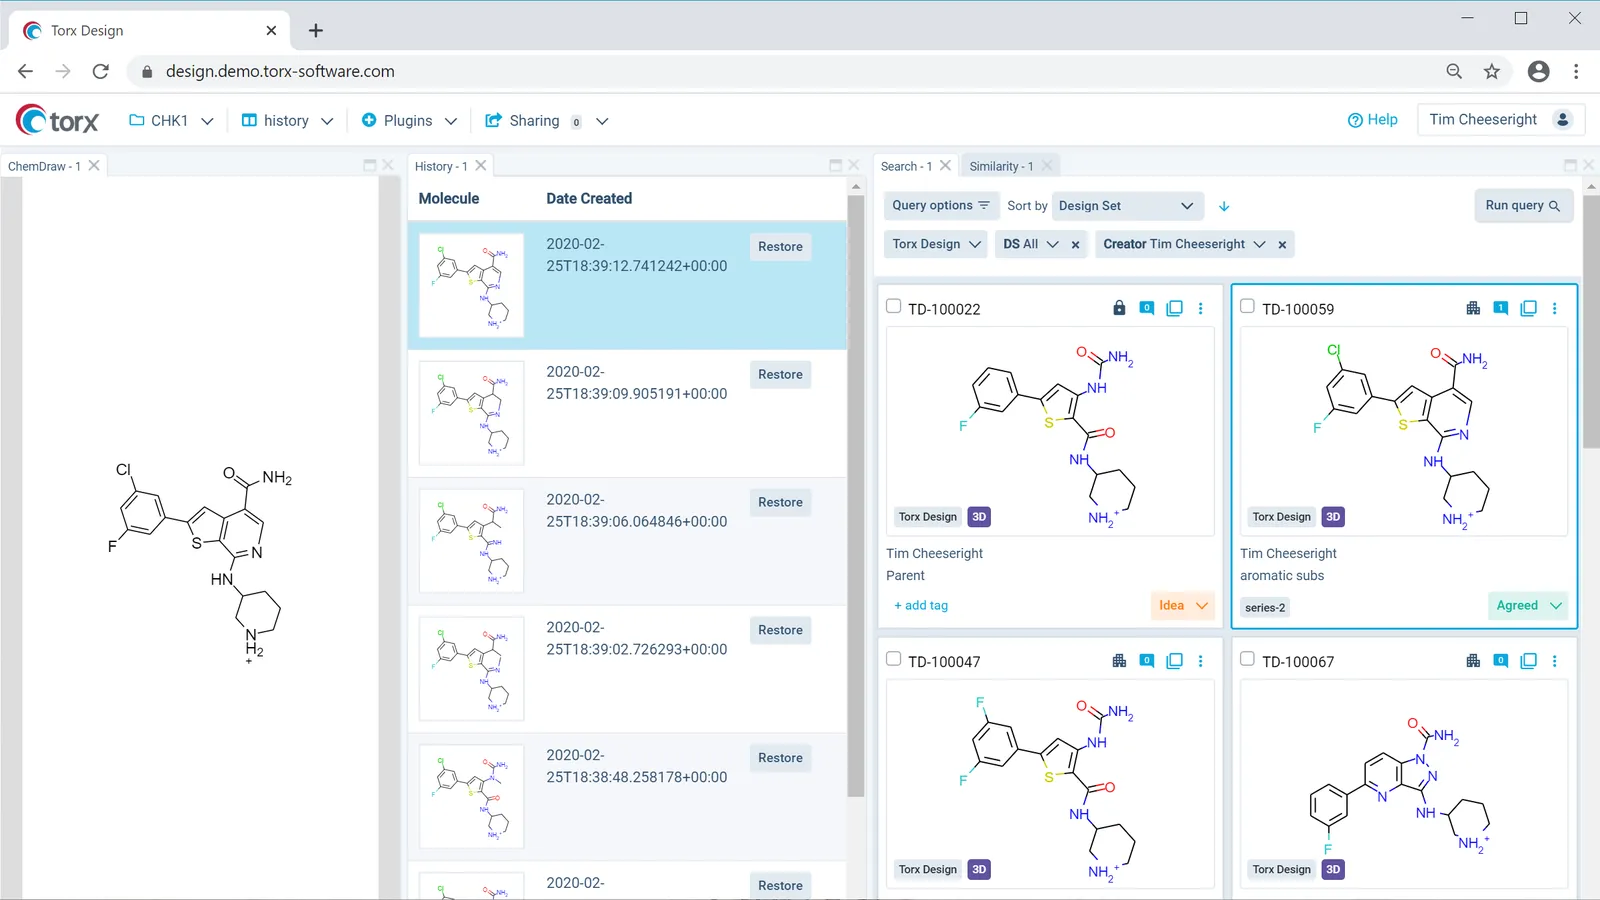 Torx Design: Search for specific molecules and view their history